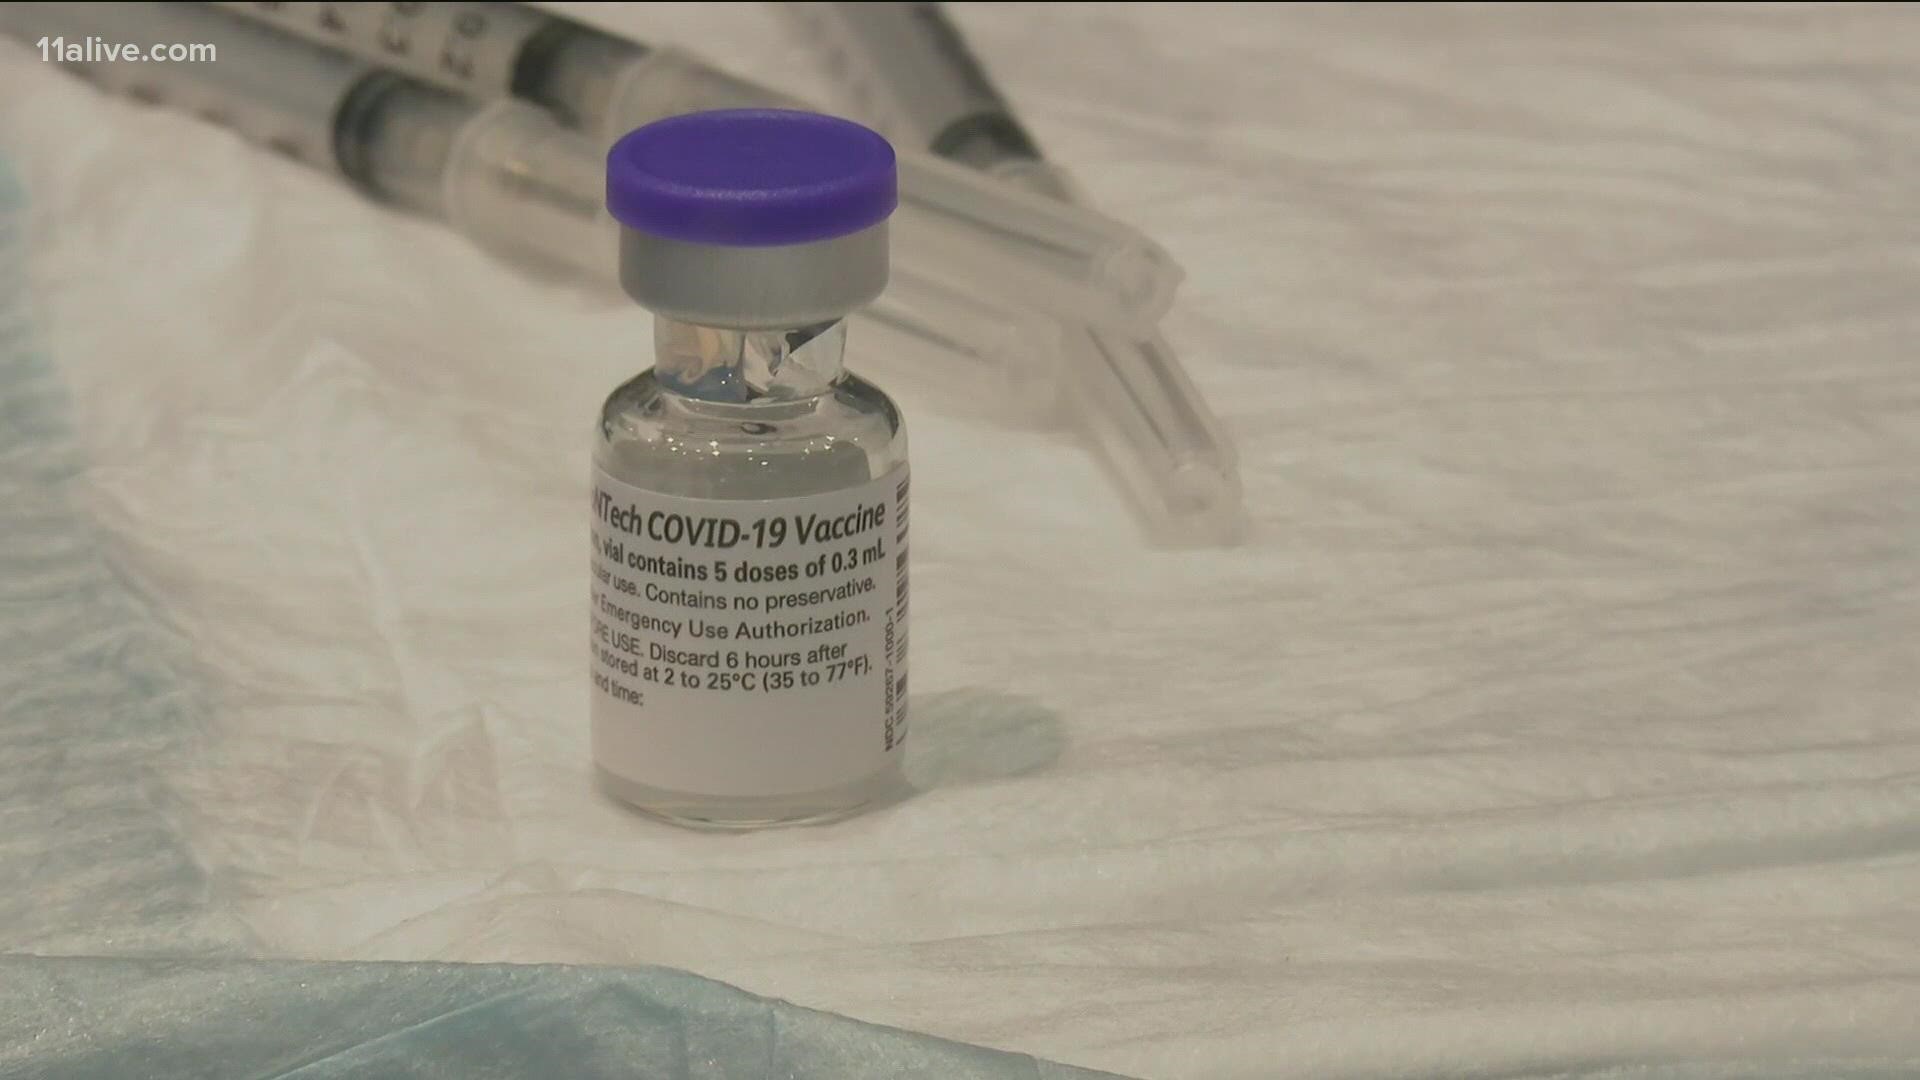 Georgia health care workers told 11Alive, they've been battling misinformation about COVID vaccines. They said it's becoming an all-consuming part of their job.